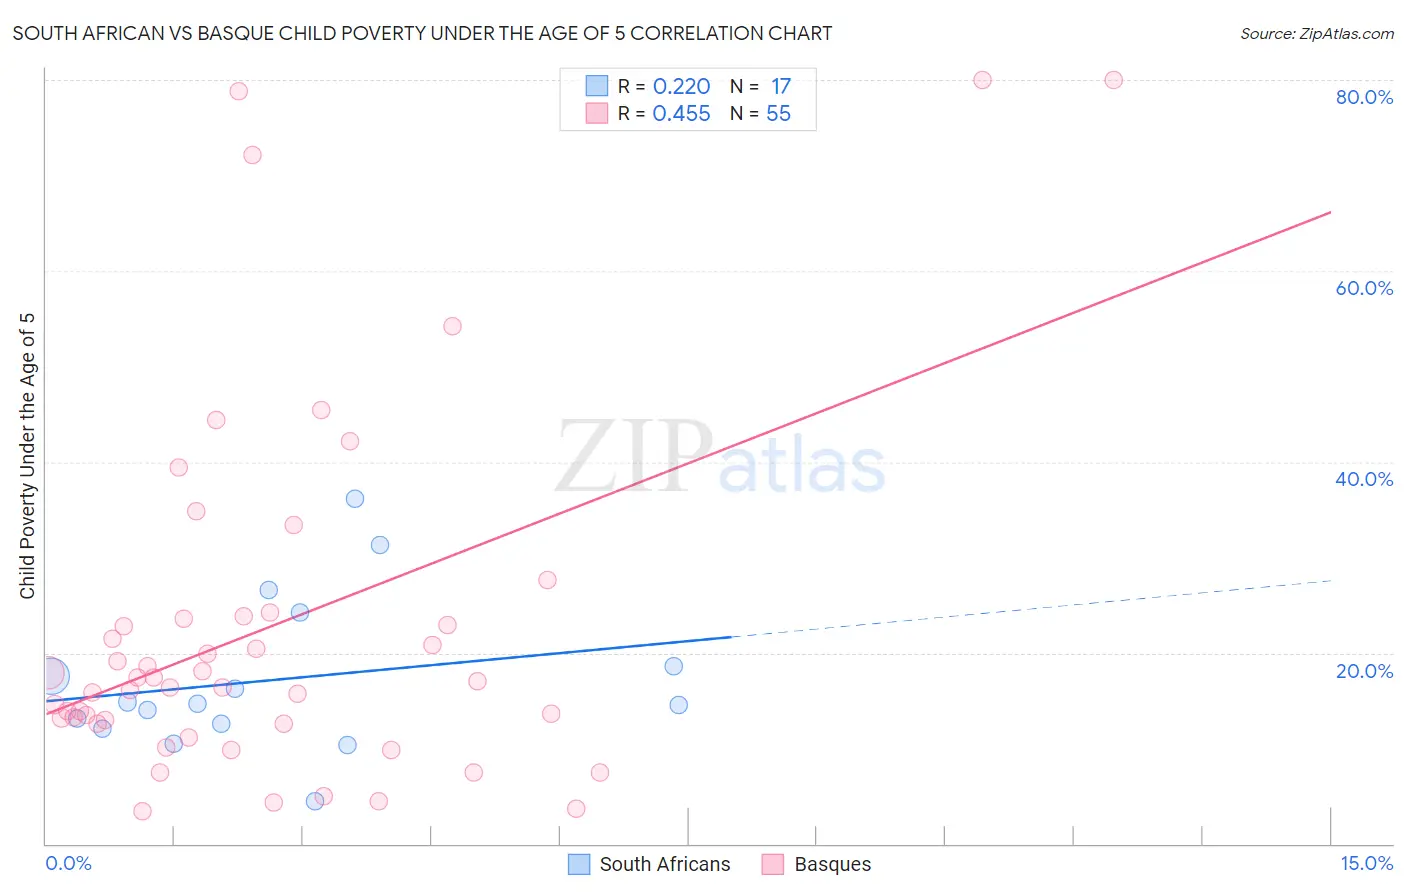 South African vs Basque Child Poverty Under the Age of 5